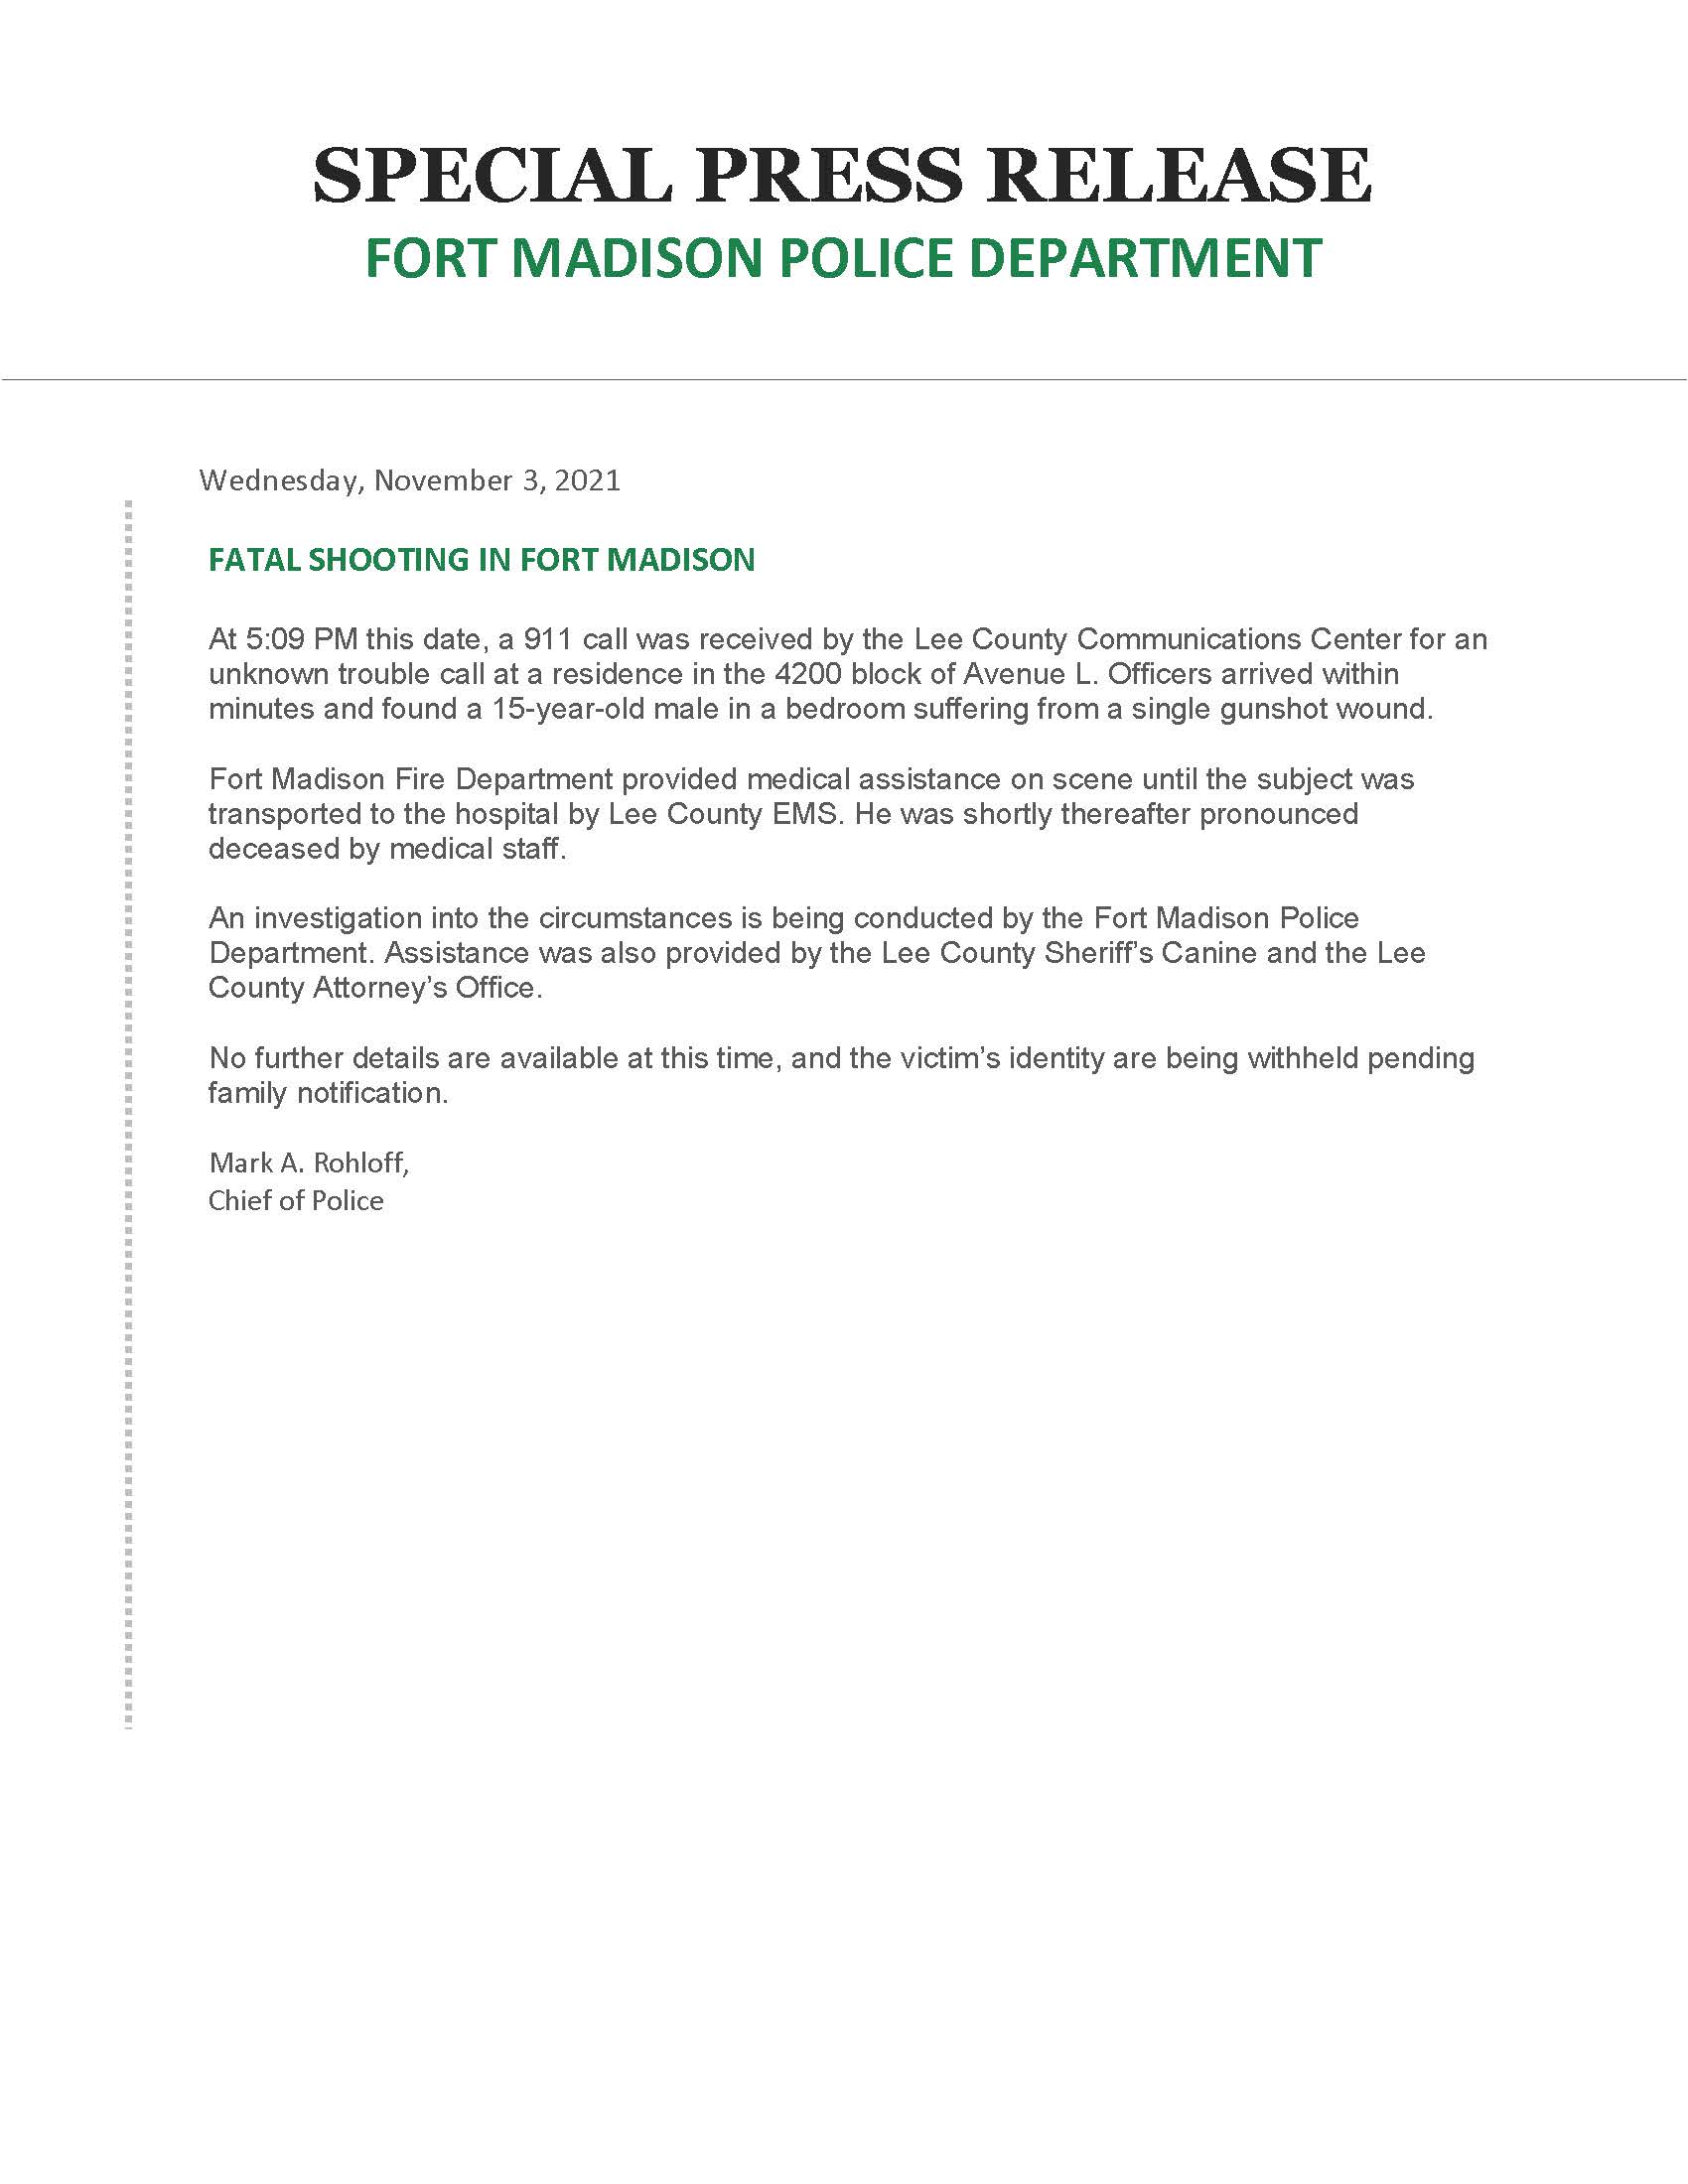 Link to Fort Madison press release